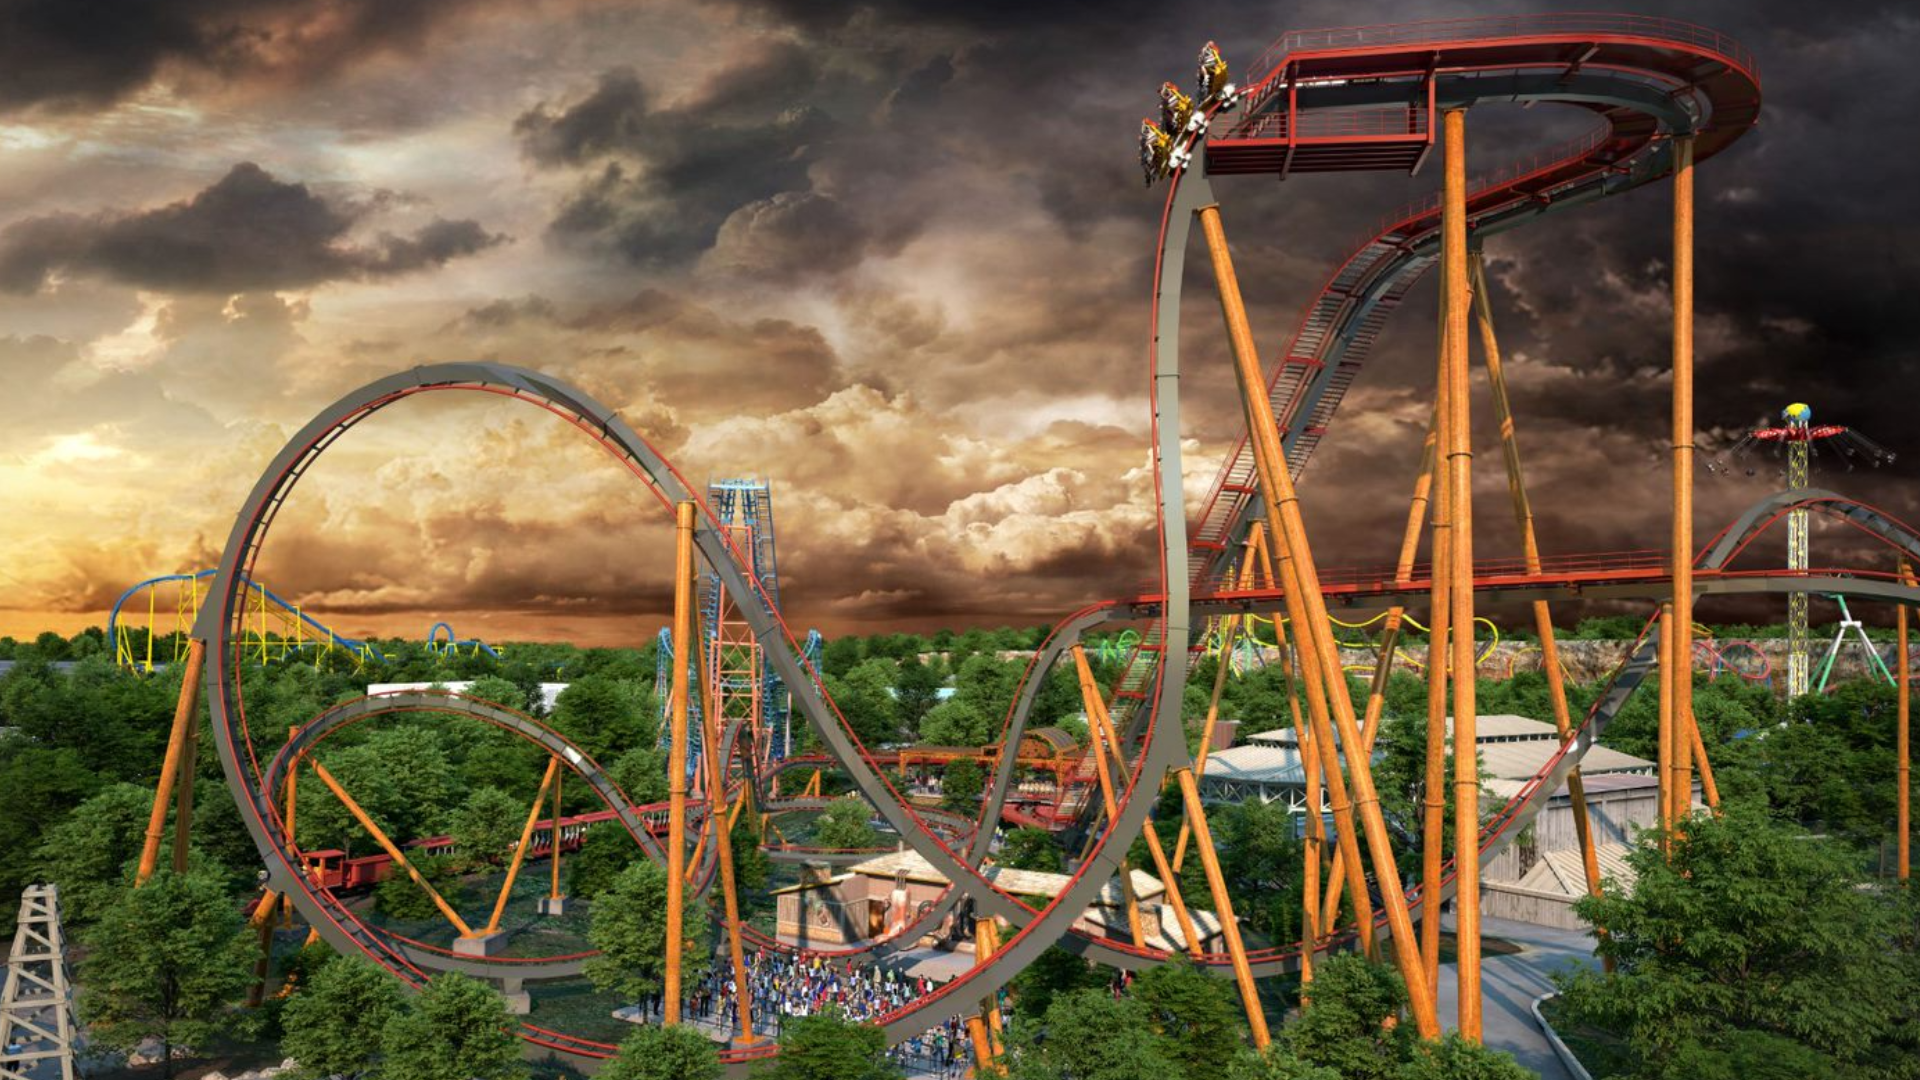 Dr. Diabolical’s Cliffhanger features three 21-passenger trains as riders reach a height of 15 stories.